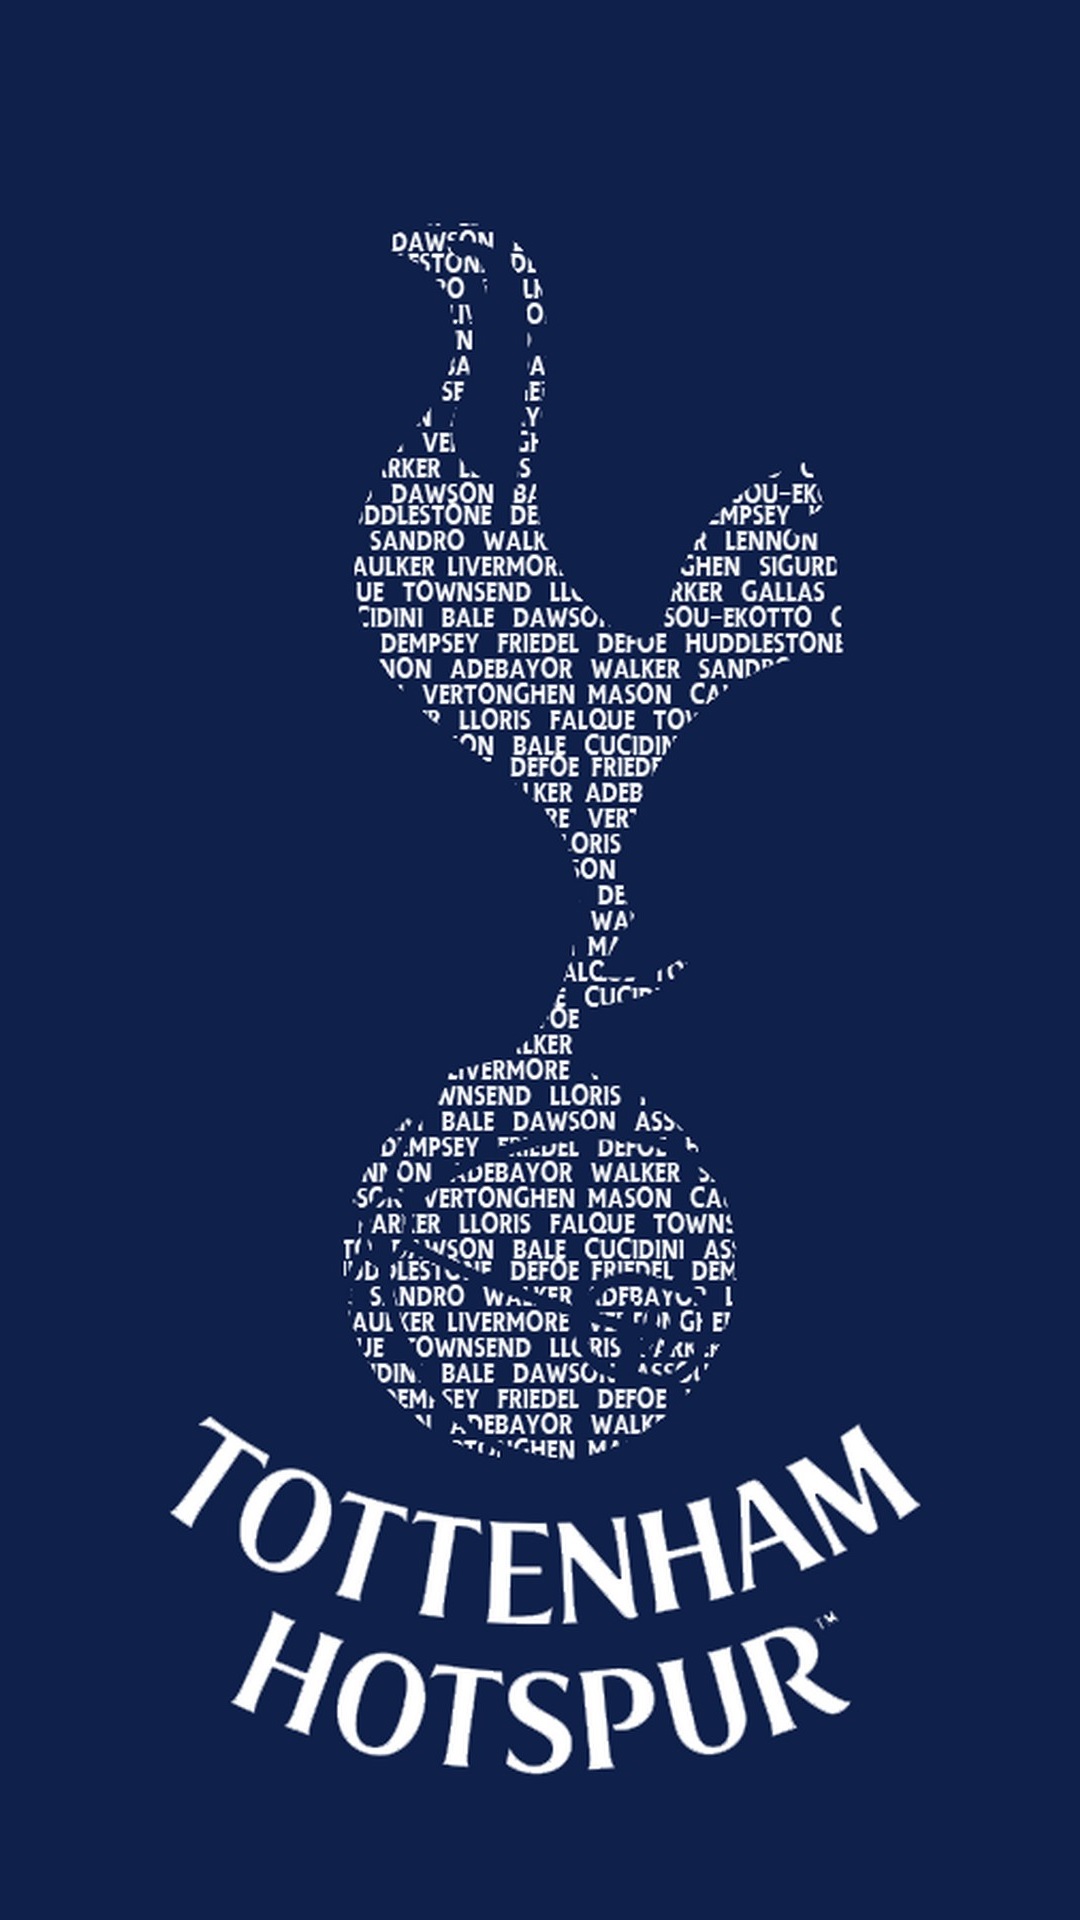 Wallpaper Tottenham Hotspur iPhone with high-resolution 1080x1920 pixel. You can use this wallpaper for your iPhone 5, 6, 7, 8, X, XS, XR backgrounds, Mobile Screensaver, or iPad Lock Screen